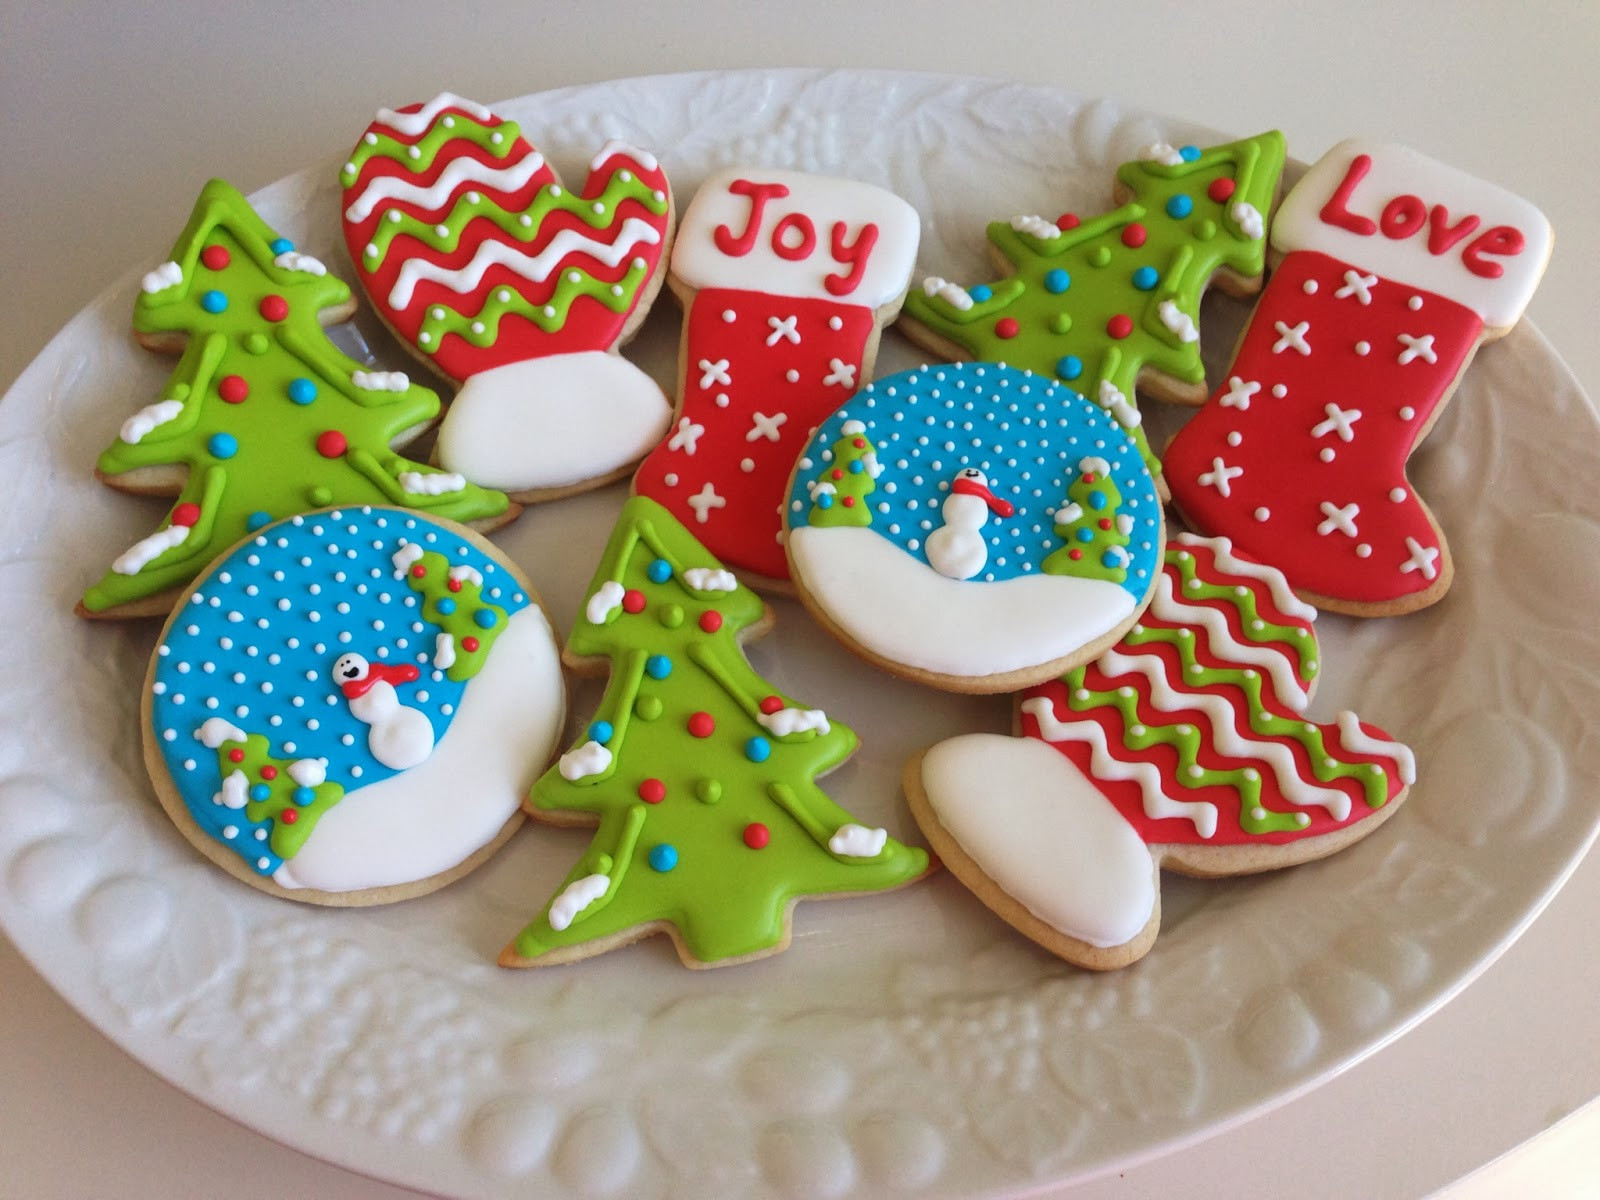 Cutout Christmas Cookies
 monograms & cake Christmas Cut Out Sugar Cookies with